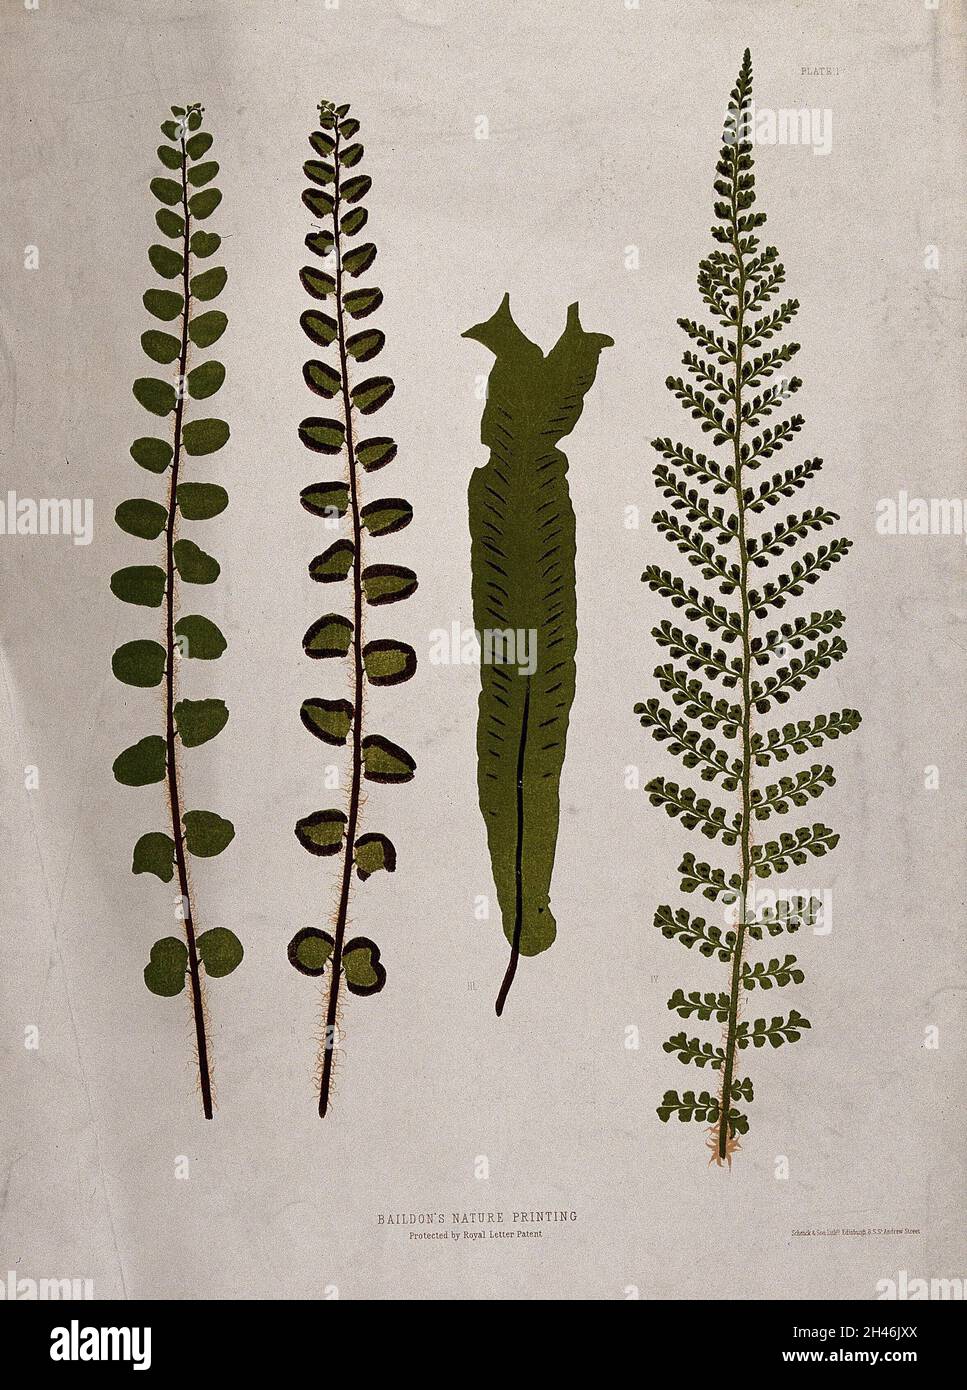 Four fern fronds, one of a hart's tongue fern (Asplenium species). Chromolithograph after a nature print. Stock Photo